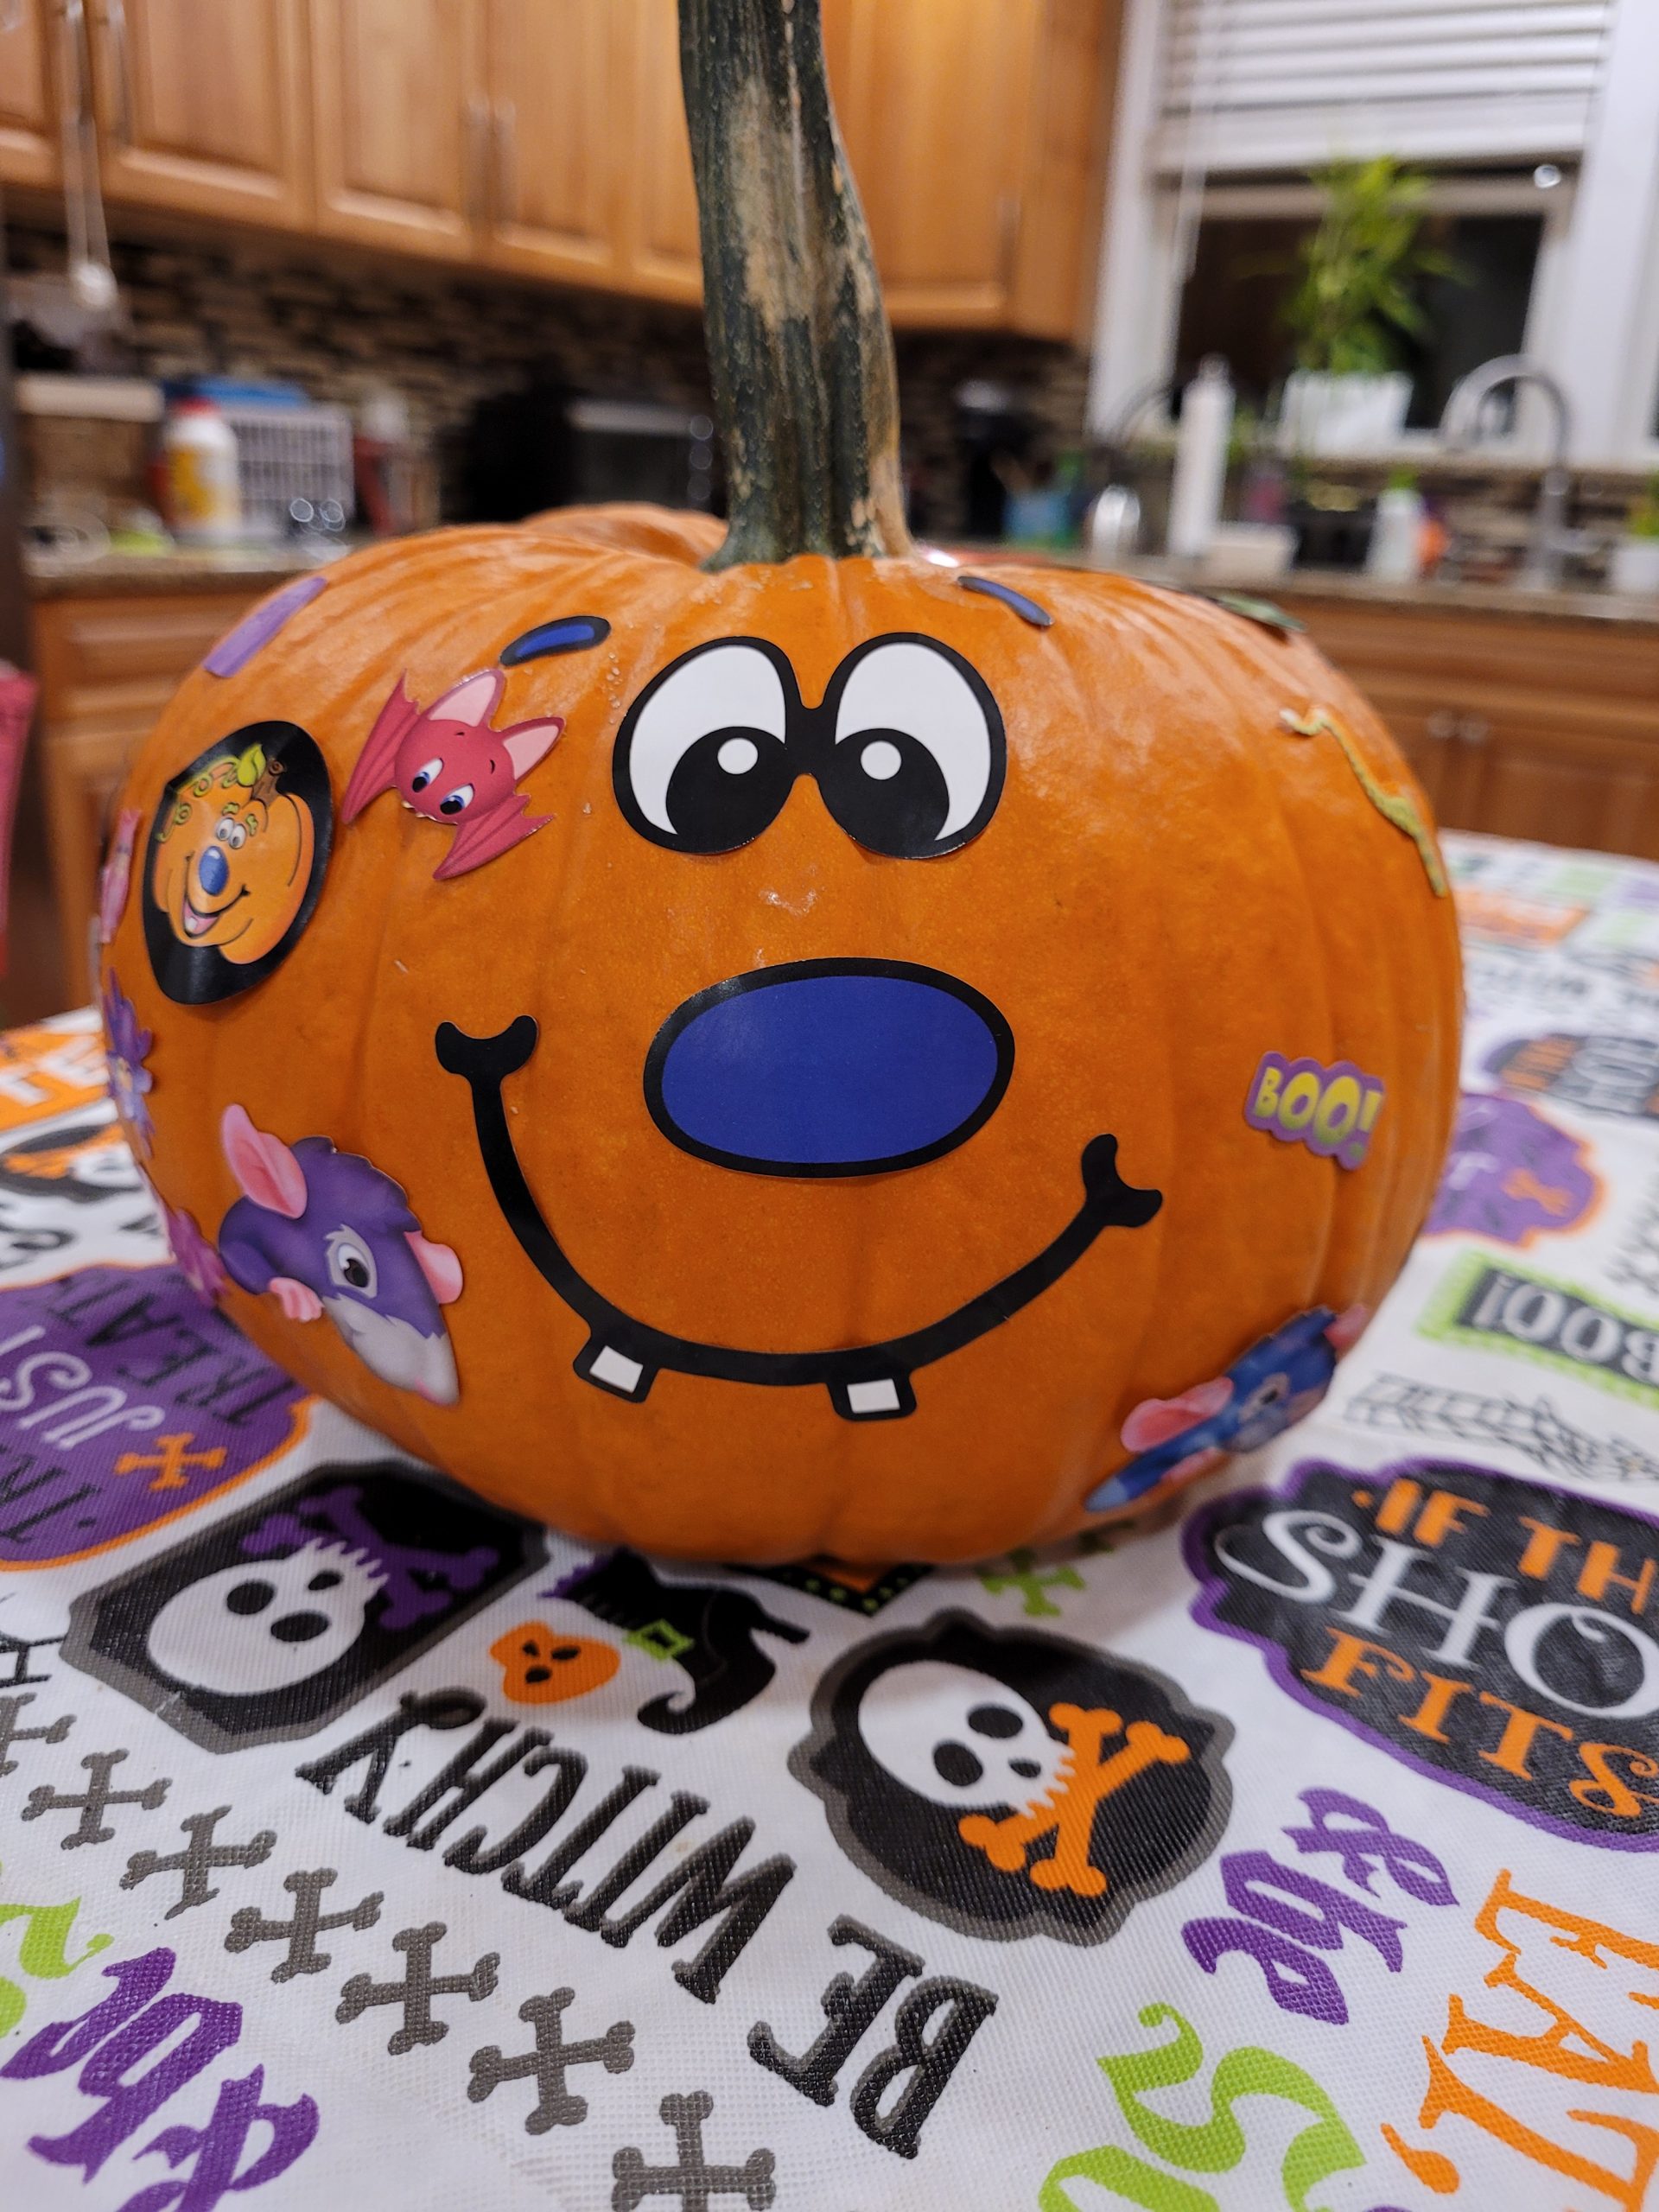 A pumpkin decorated with a smiley face on a table